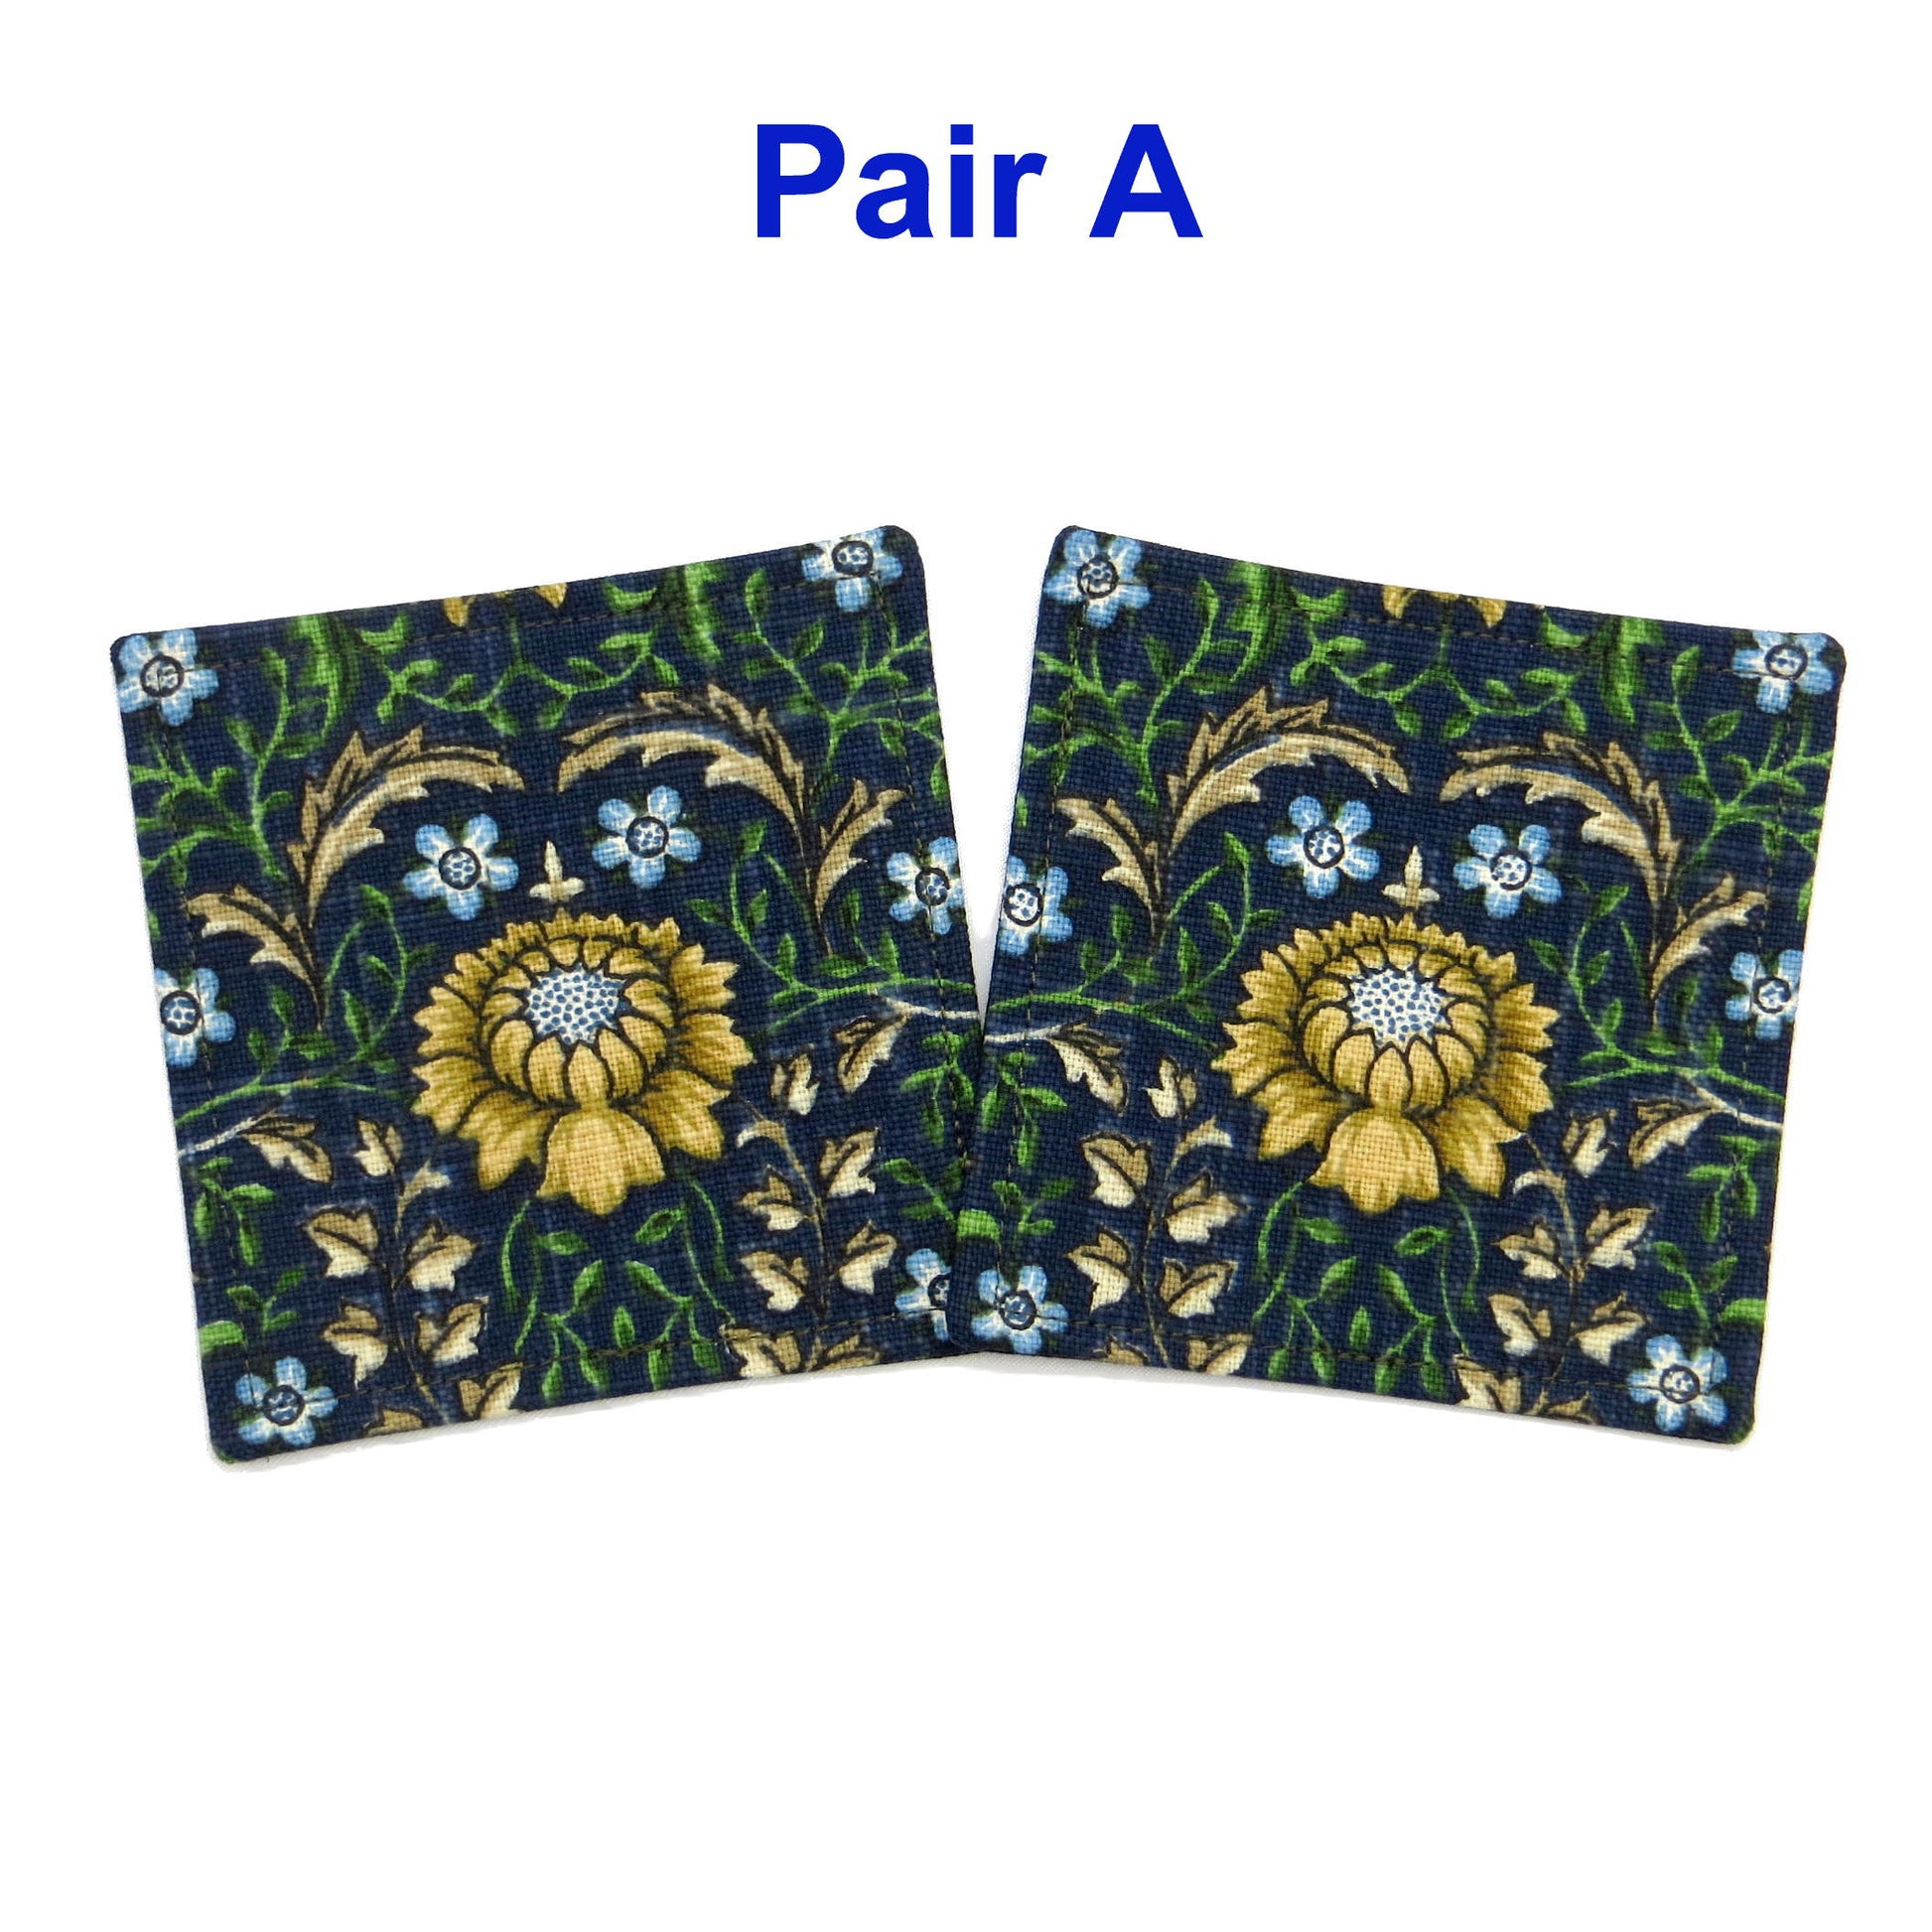 Square coasters with yellow, red, and blue flowers with green vines on blue background